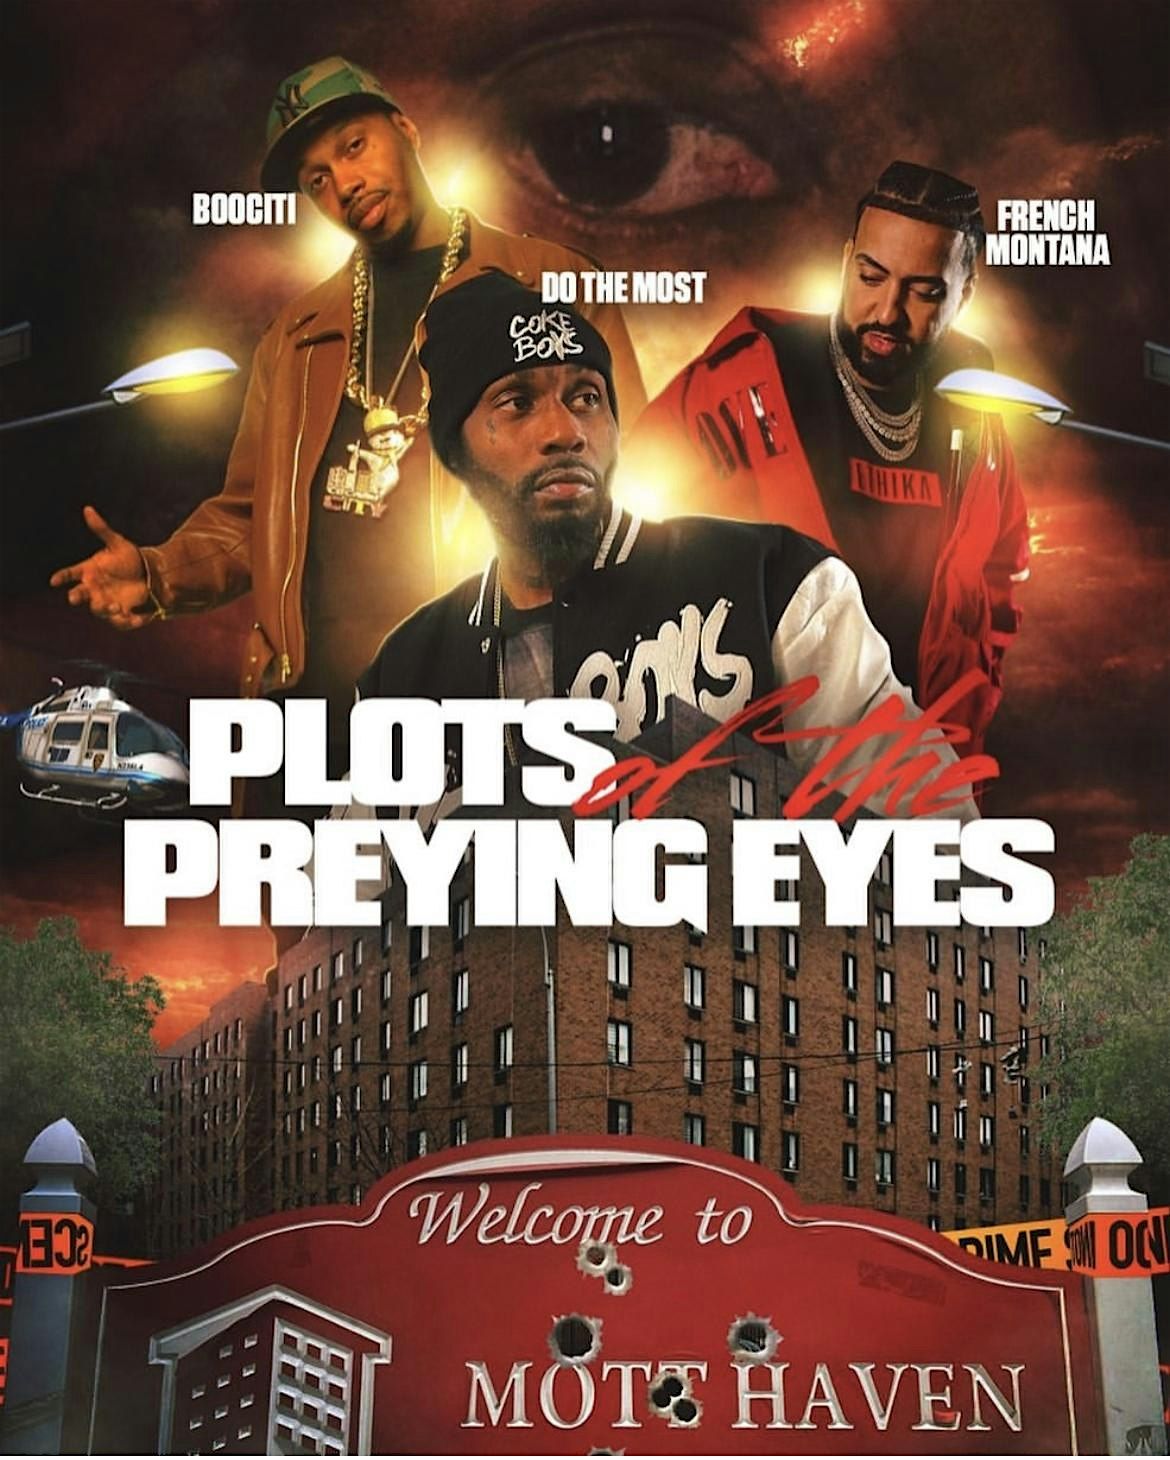 Red carpet movie premiere plots of the preying eyes